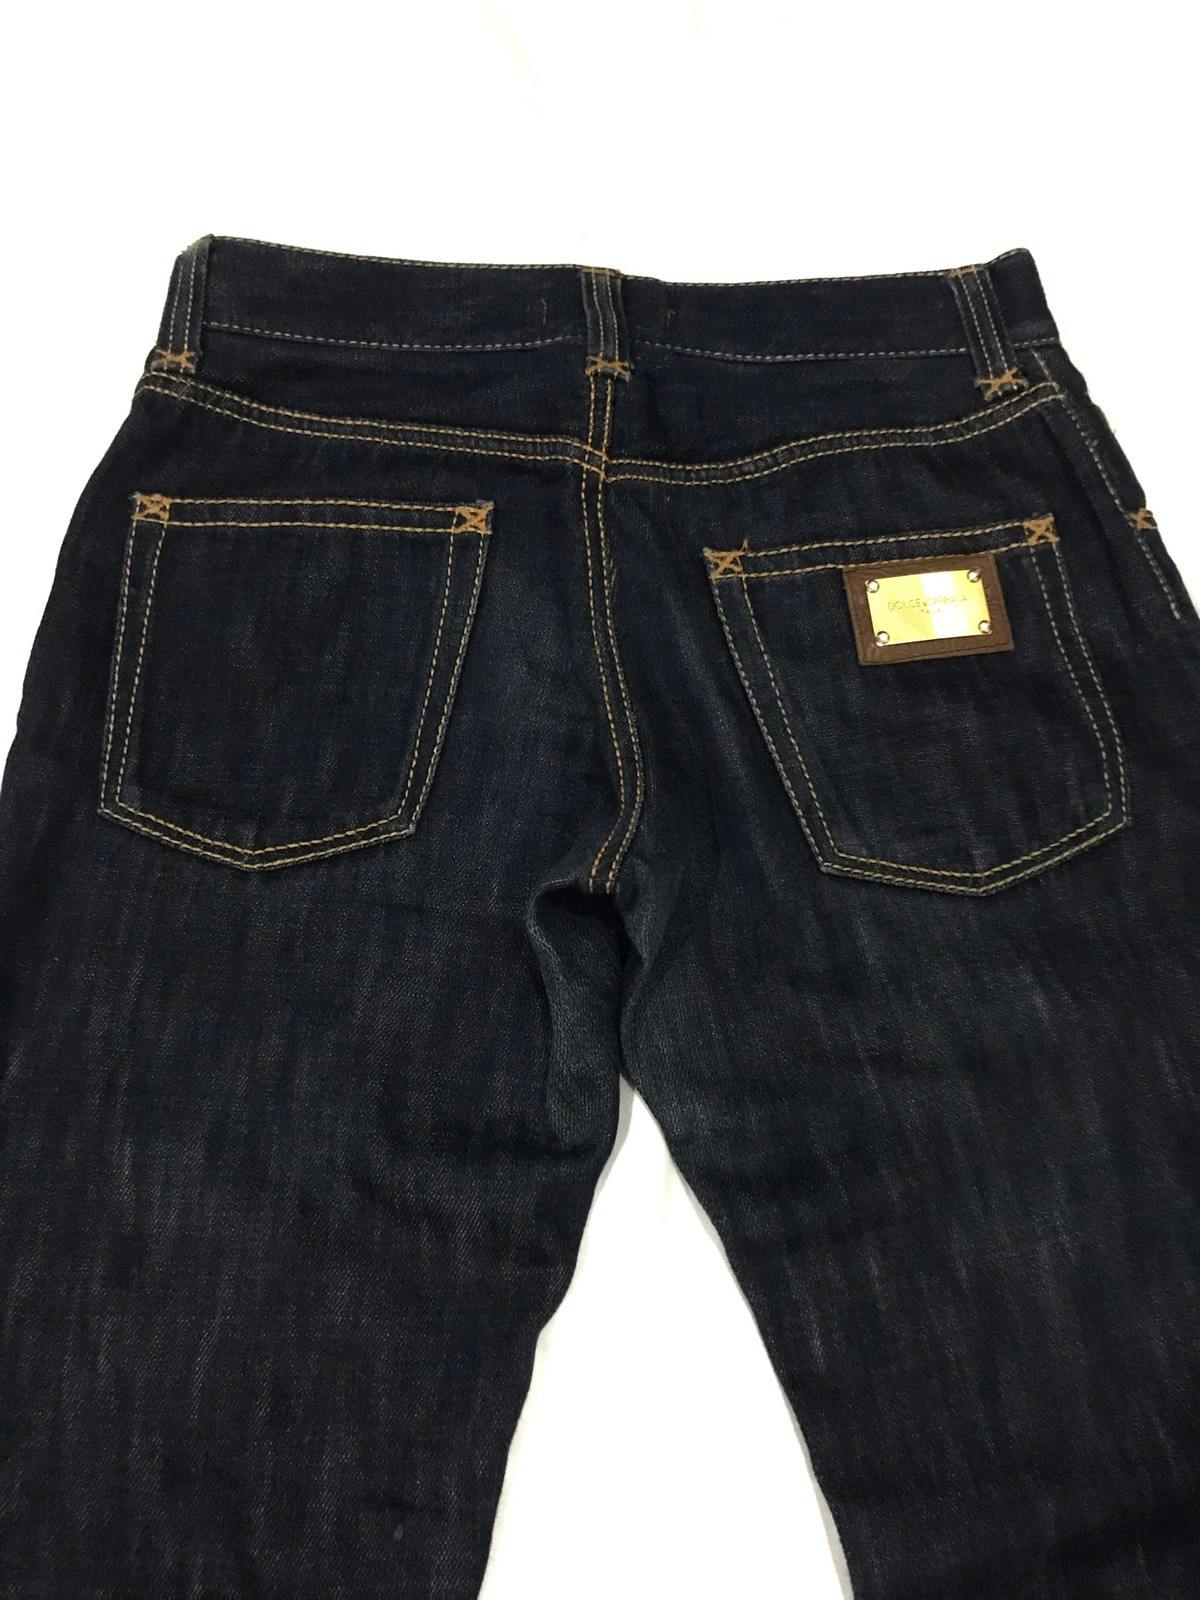 Dolce & Gabanna D&G 17 Loose Denim Jeans Made in Italy 🇮🇹 - 9